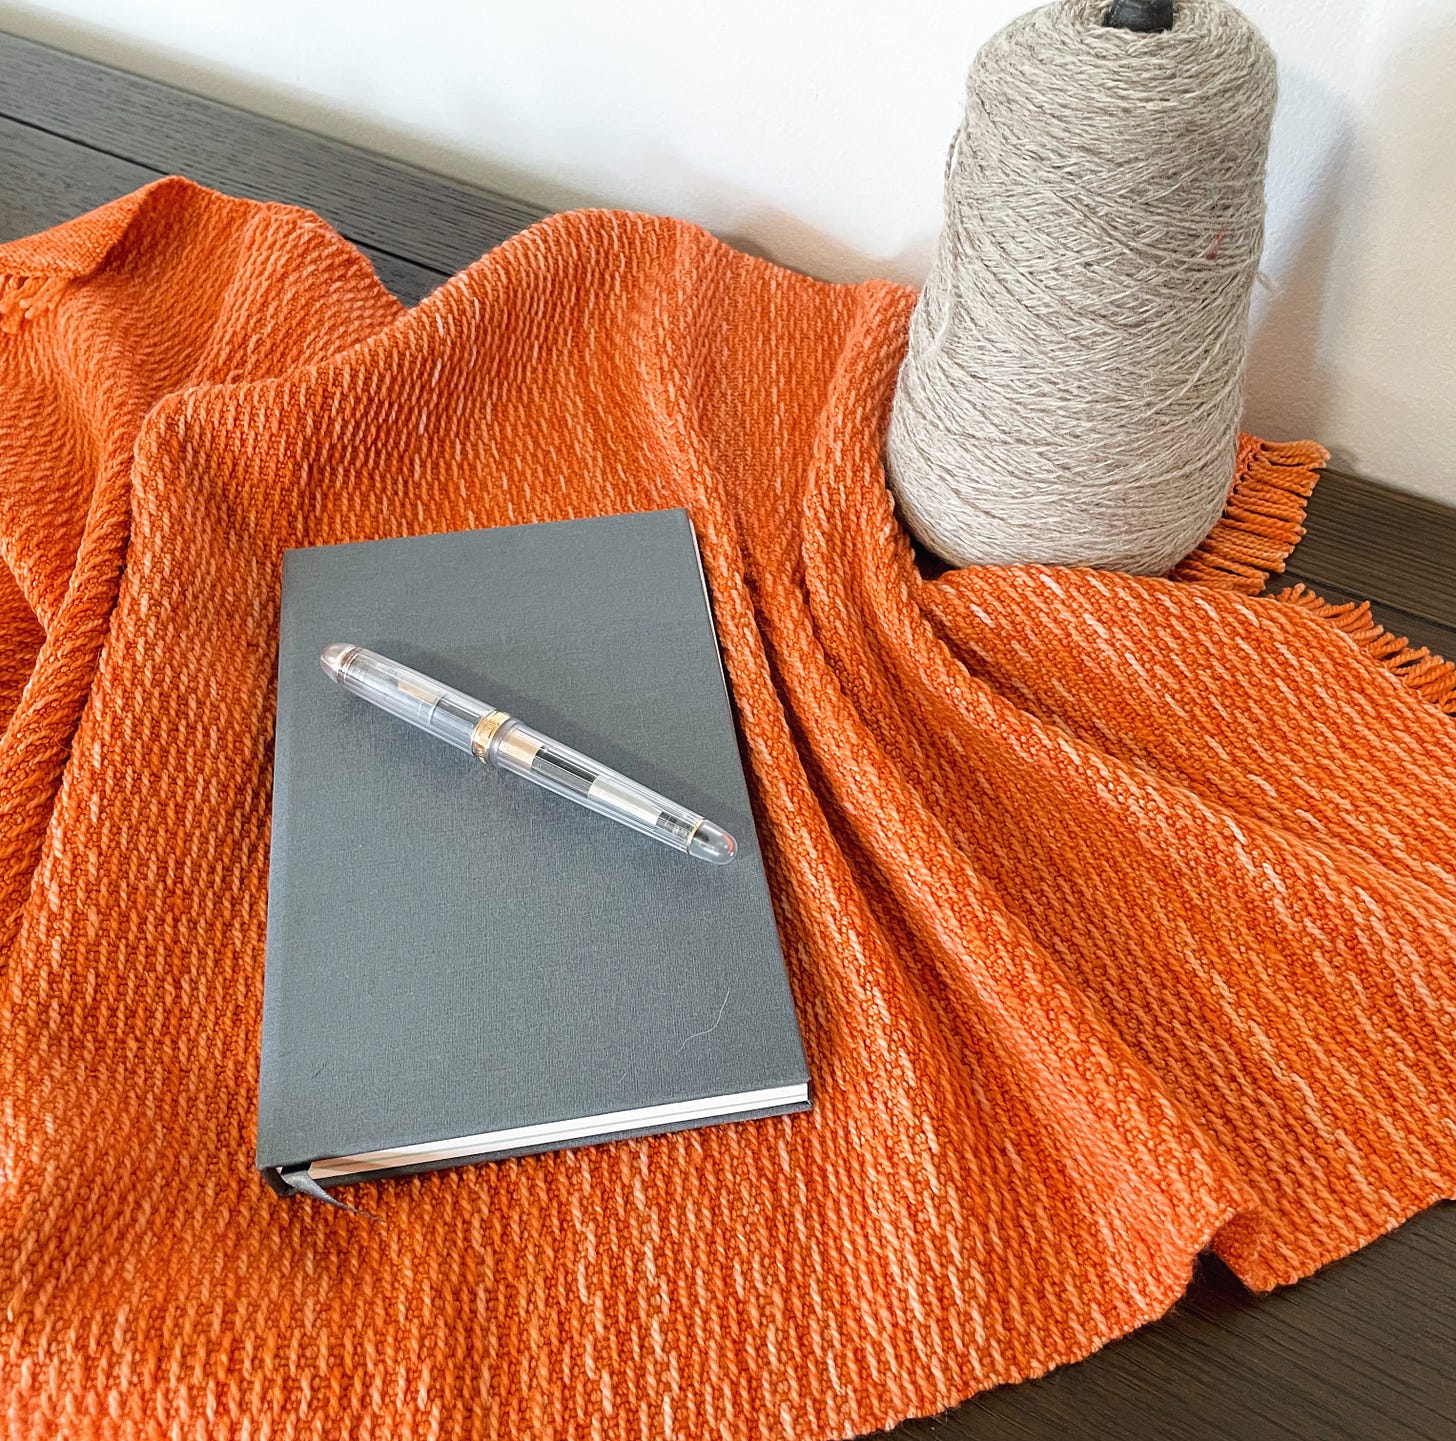 A pen on a gray notebook on an orange cloth on a brown surface. A cone of yarn nearby.